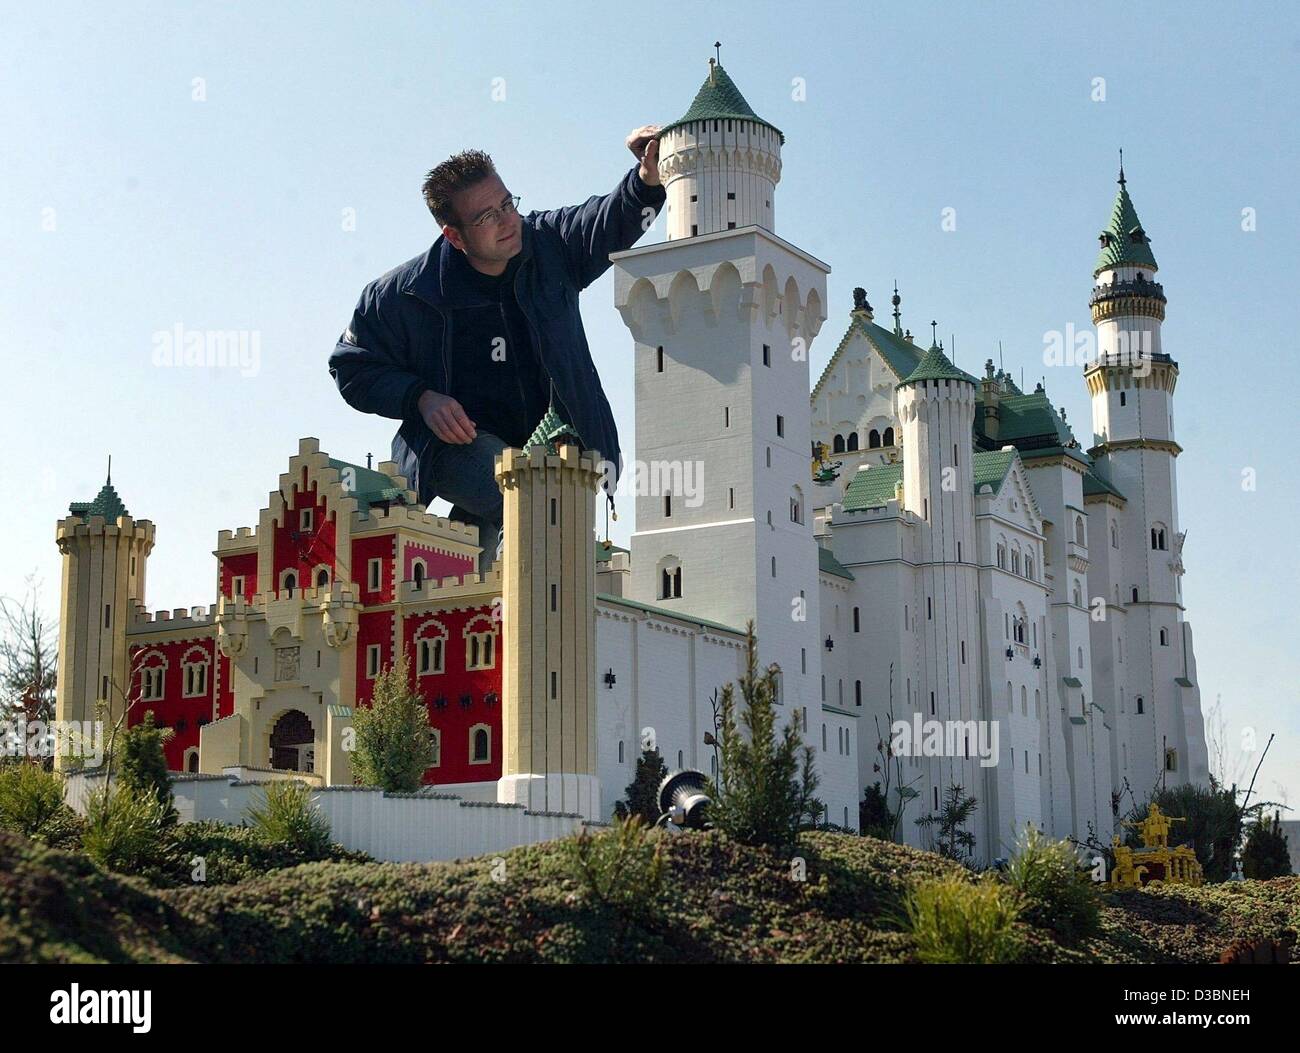 (dpa) - Model maker Ilja Schueler puts the finishing touches on the model of Neuschwanstein Castle built of Lego bricks in Legoland near Guenzburg, Germany, 8 April 2003. The Danish toy group Lego invested roughly 150 million Euro to build its fourth amusement park worldwide, which opened in 2002. T Stock Photo